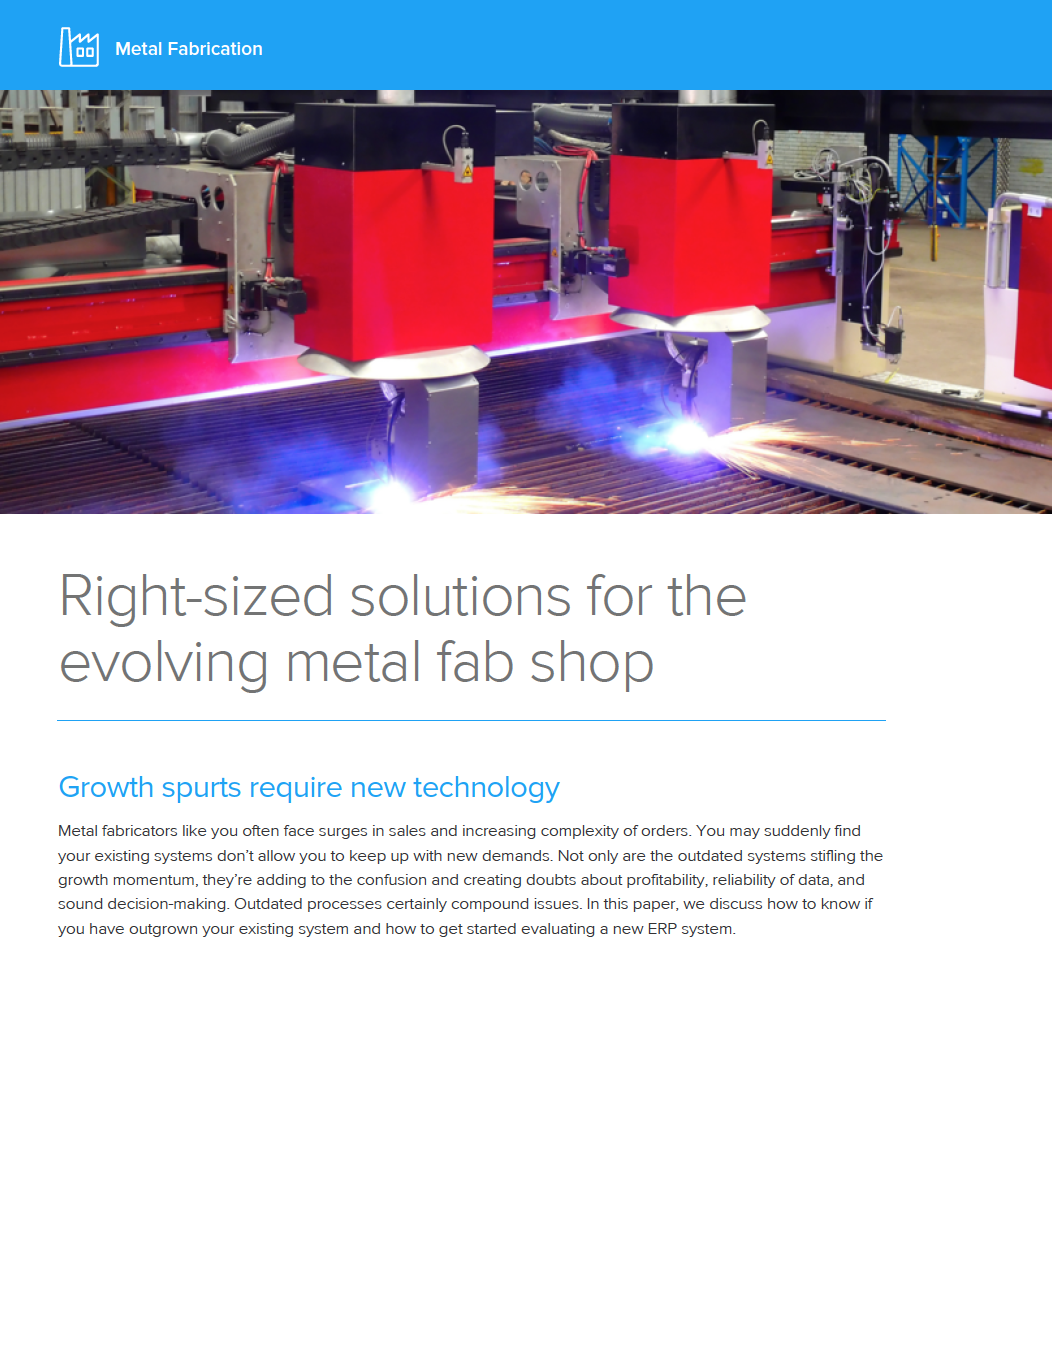 Metal fab - Right-sized solutions for the evolving metal fab shop